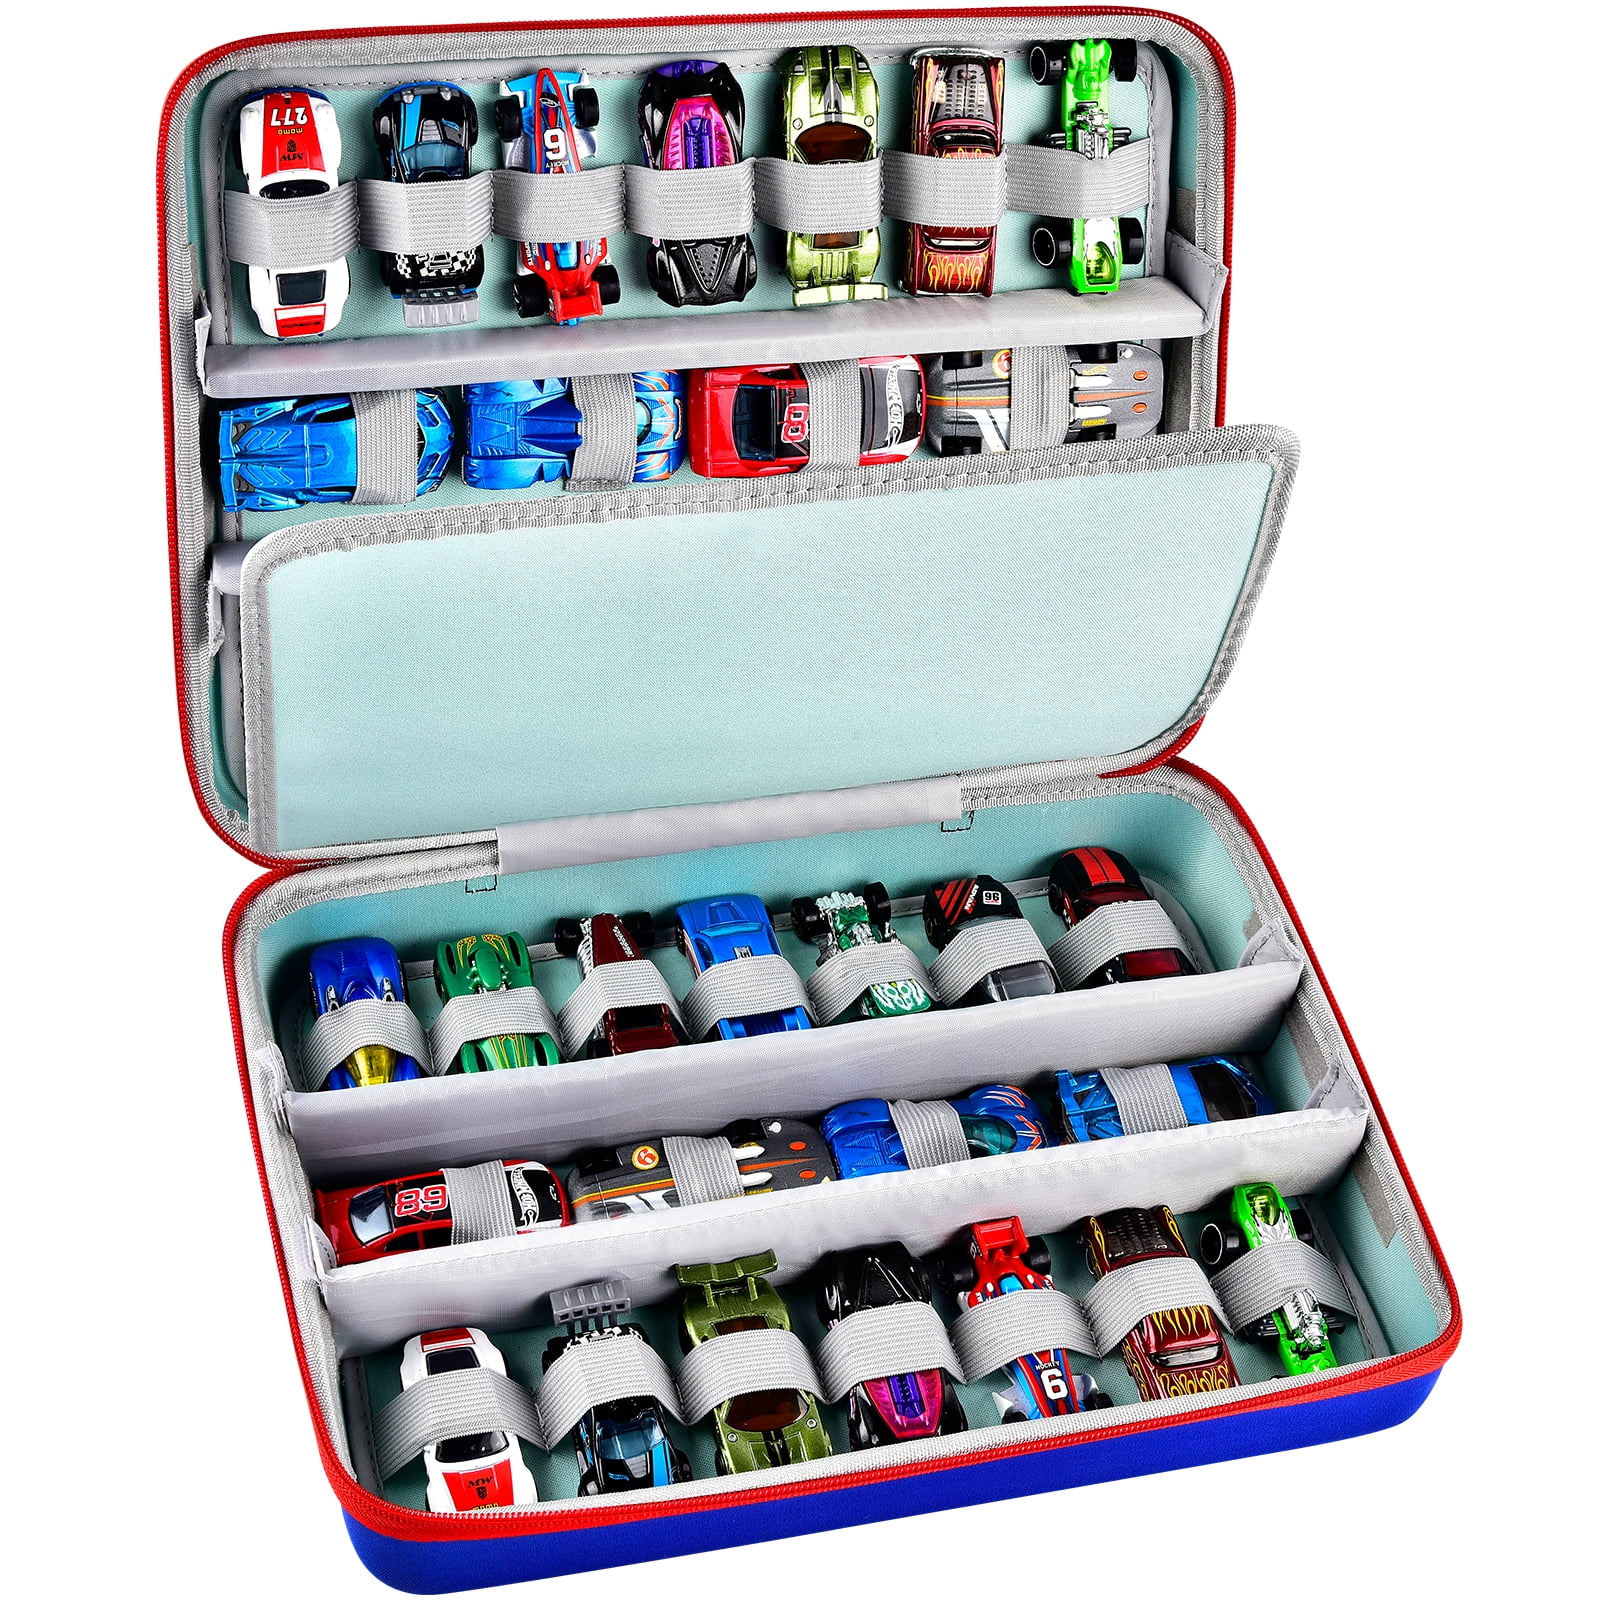 Gwcase Toy Car Organizer Case for Hotwheels Cars/ for Matchbox Cars Holds 36pcs Cars, Box Only, Size: One size, Blue